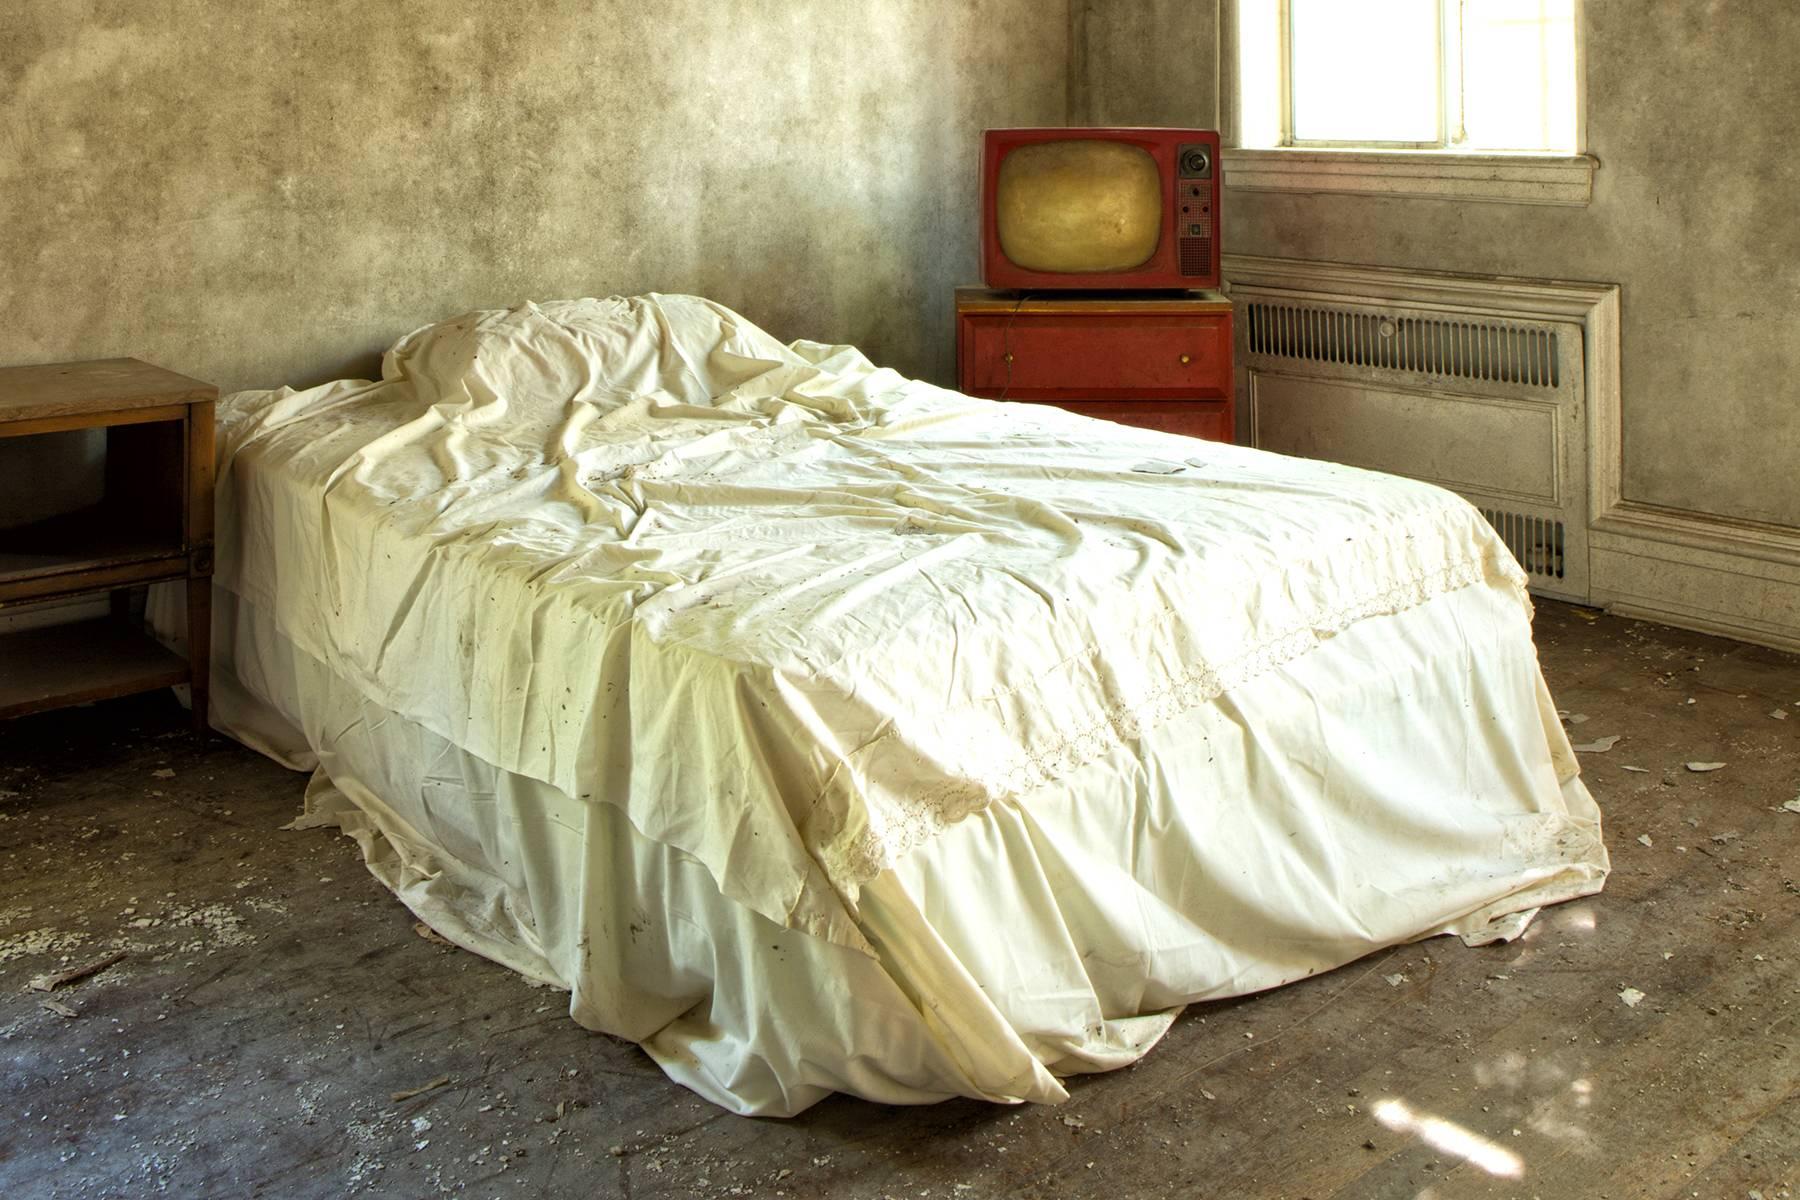 abandoned bed